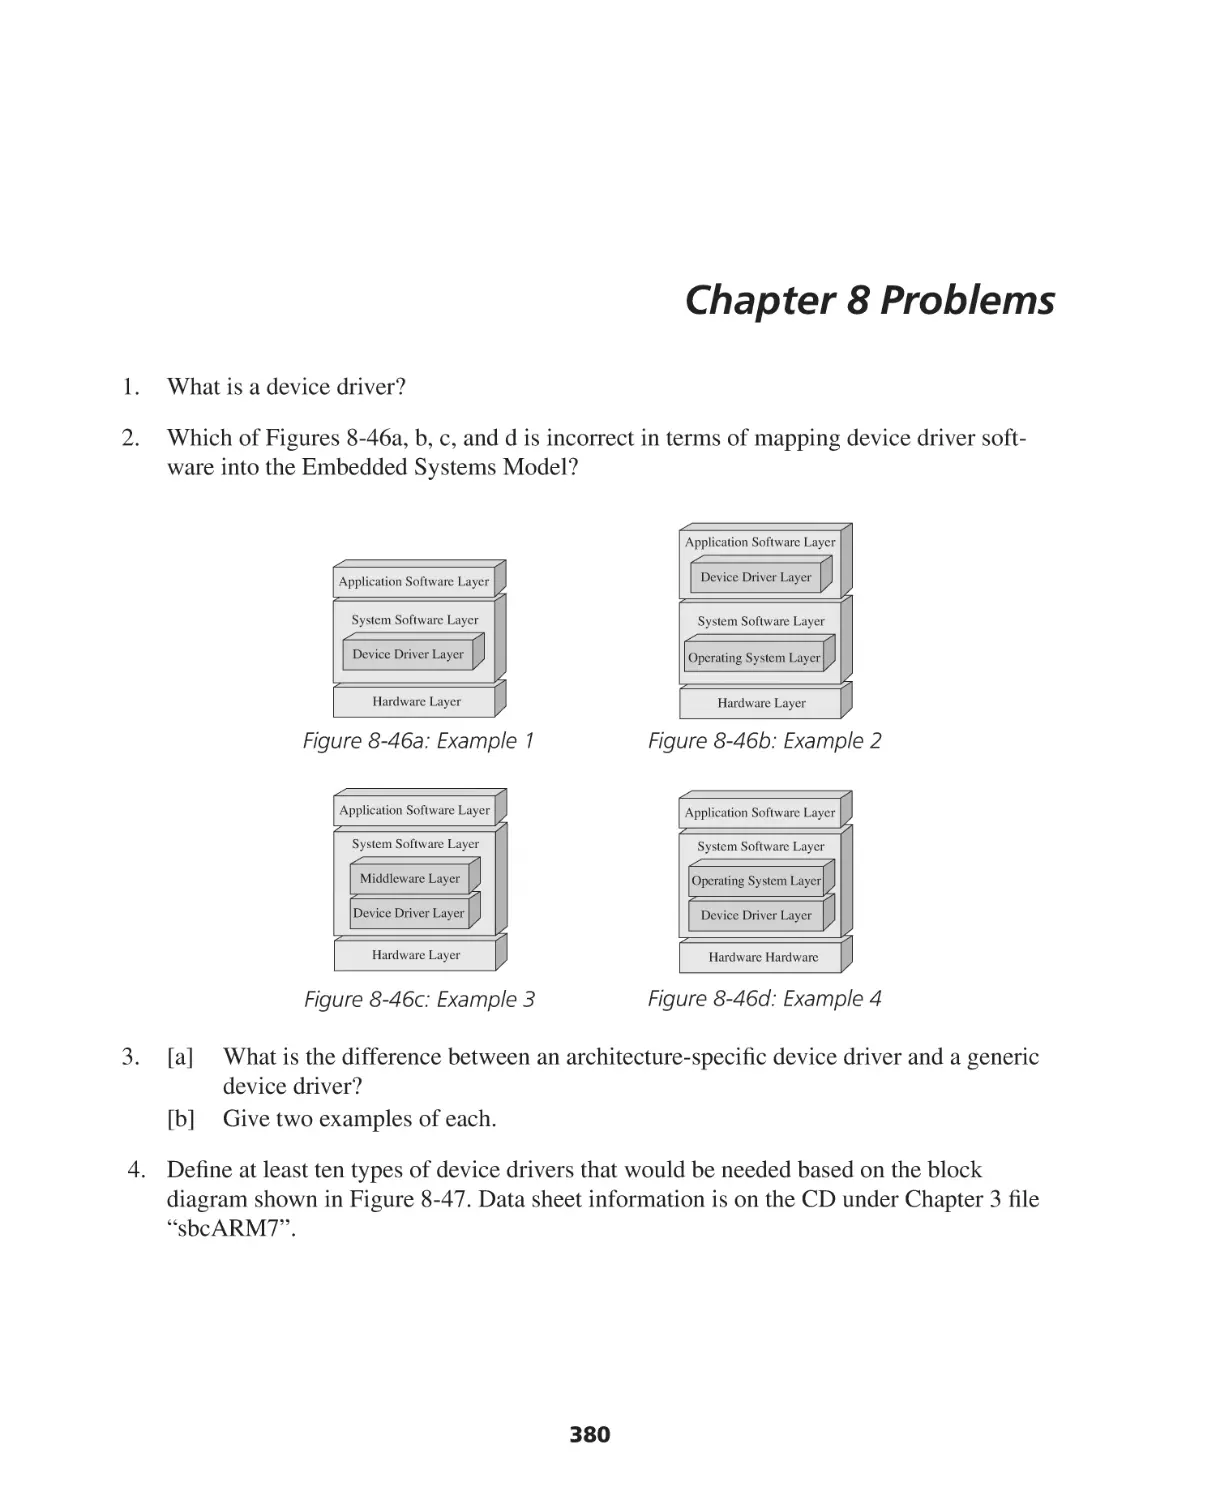 Chapter 8 Problems